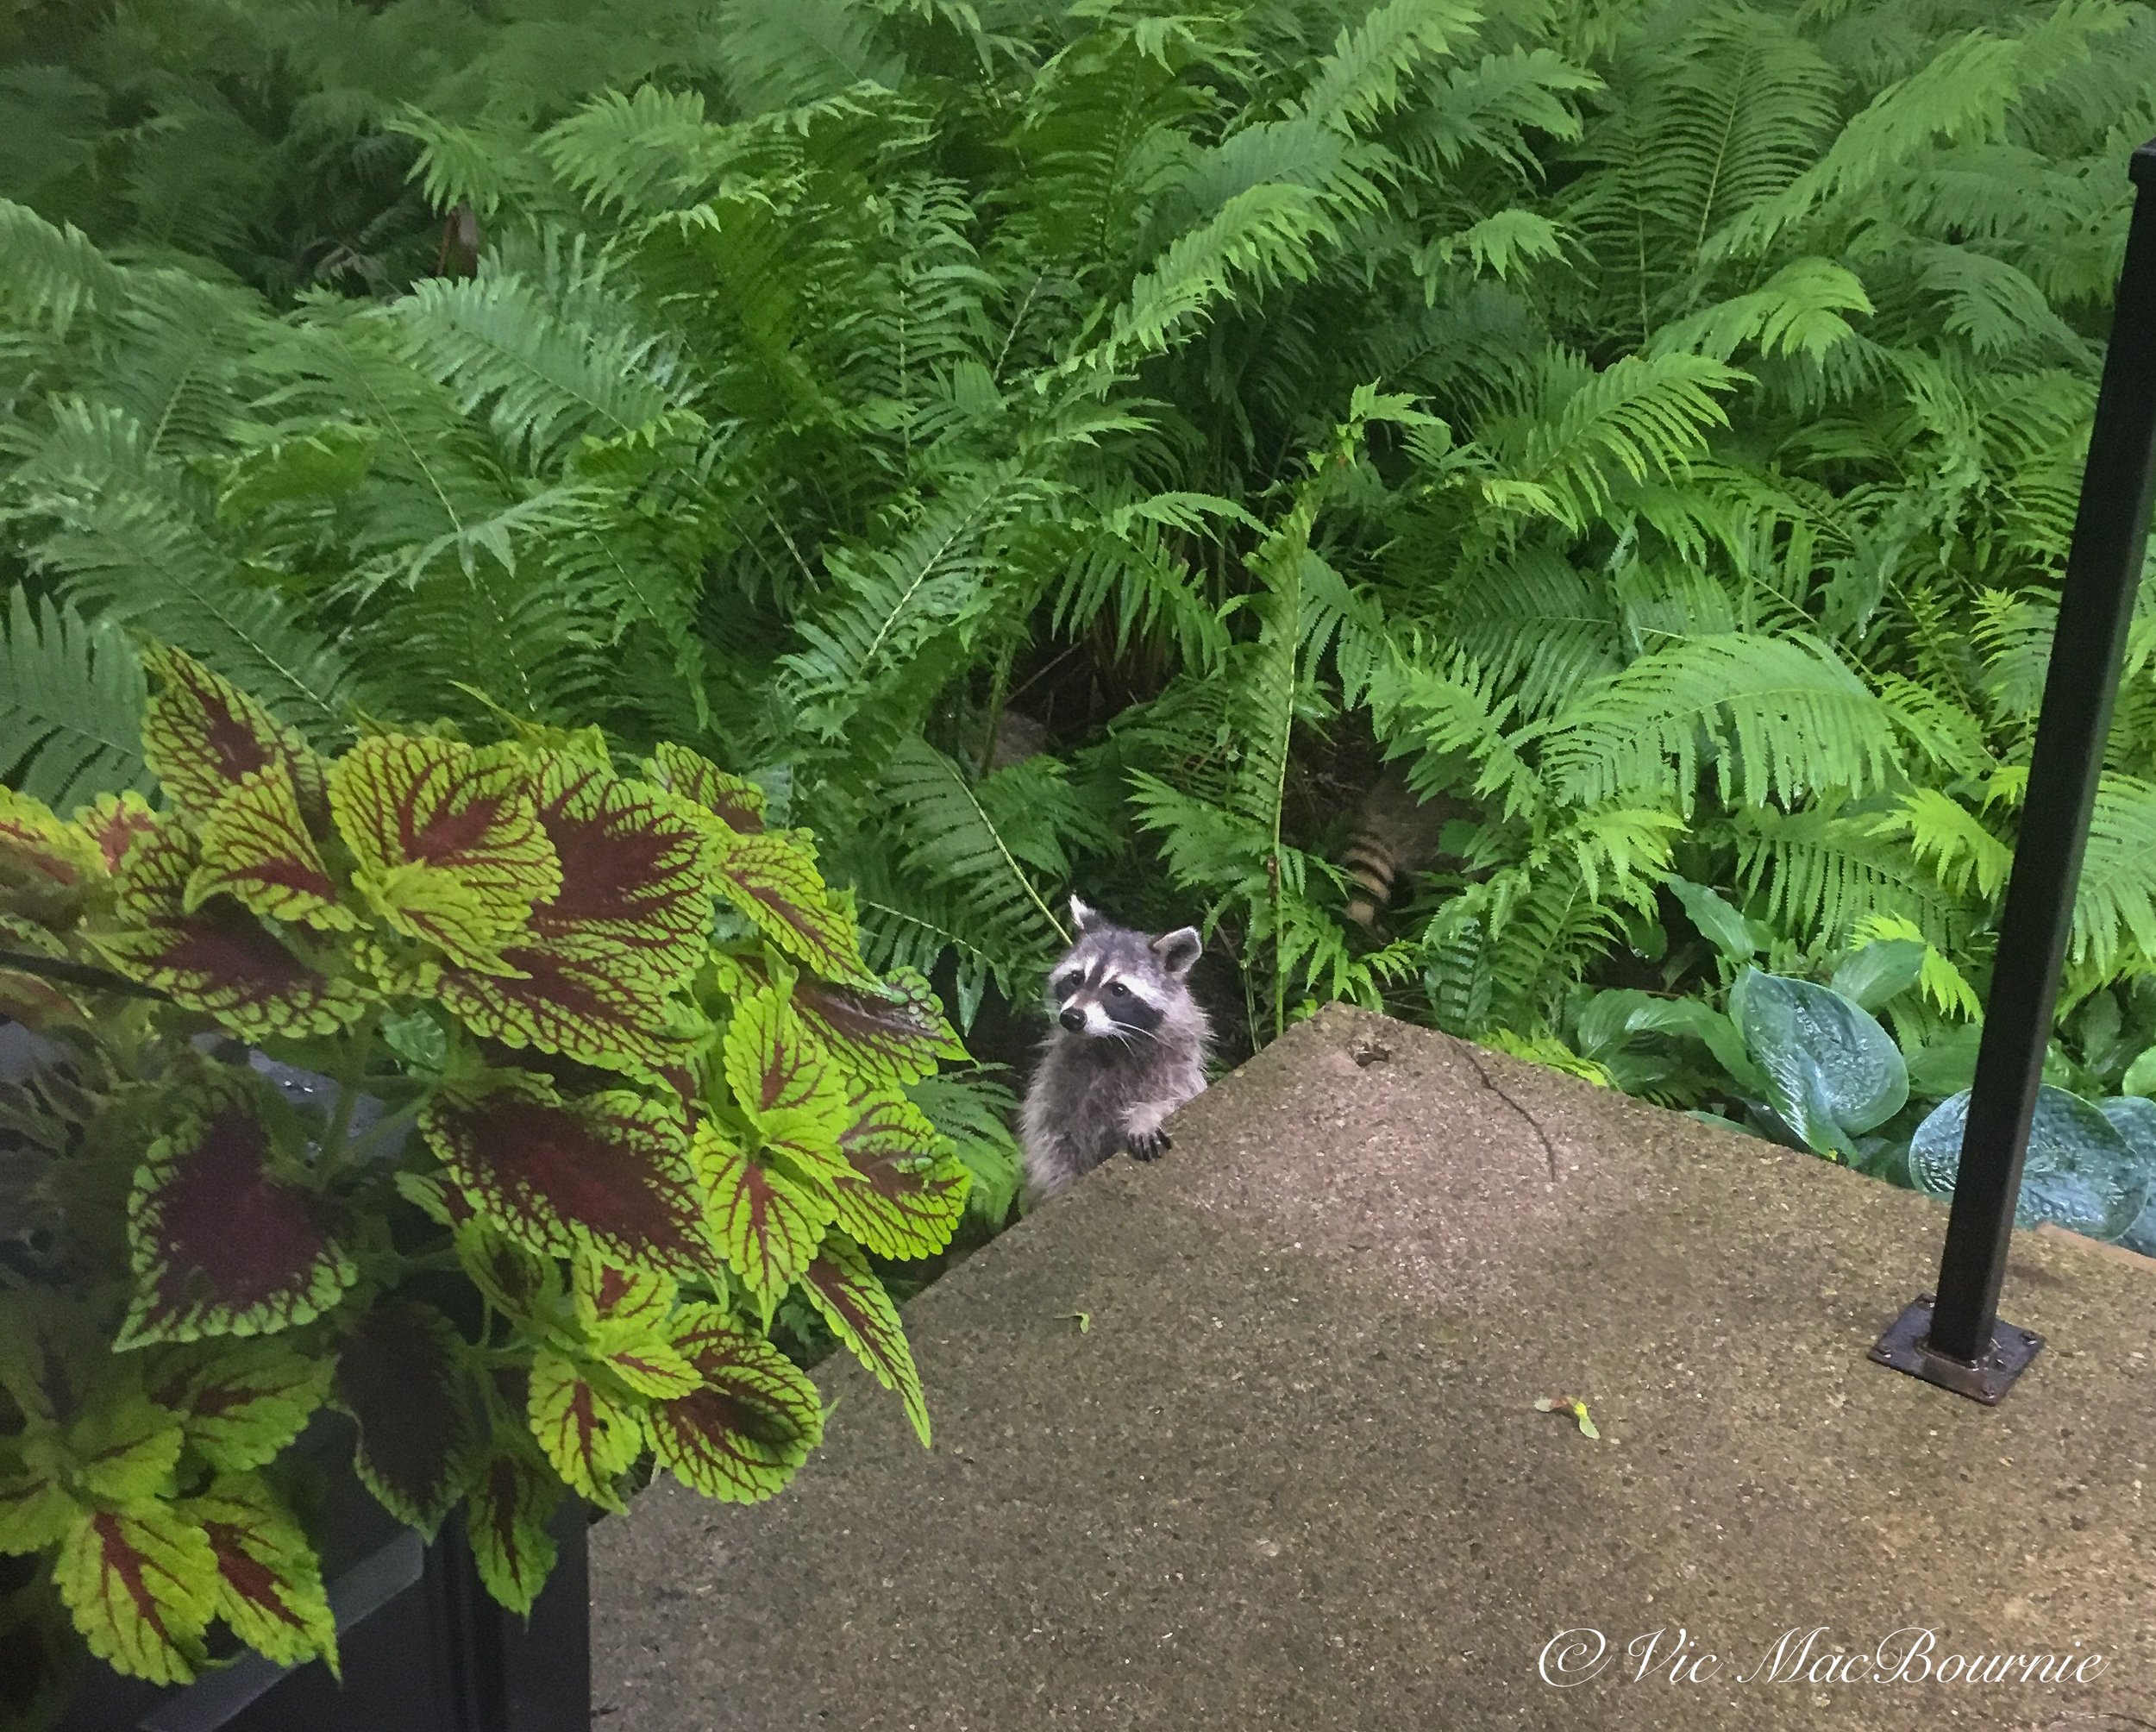 A baby raccoon among the ostrich ferns in the garden.